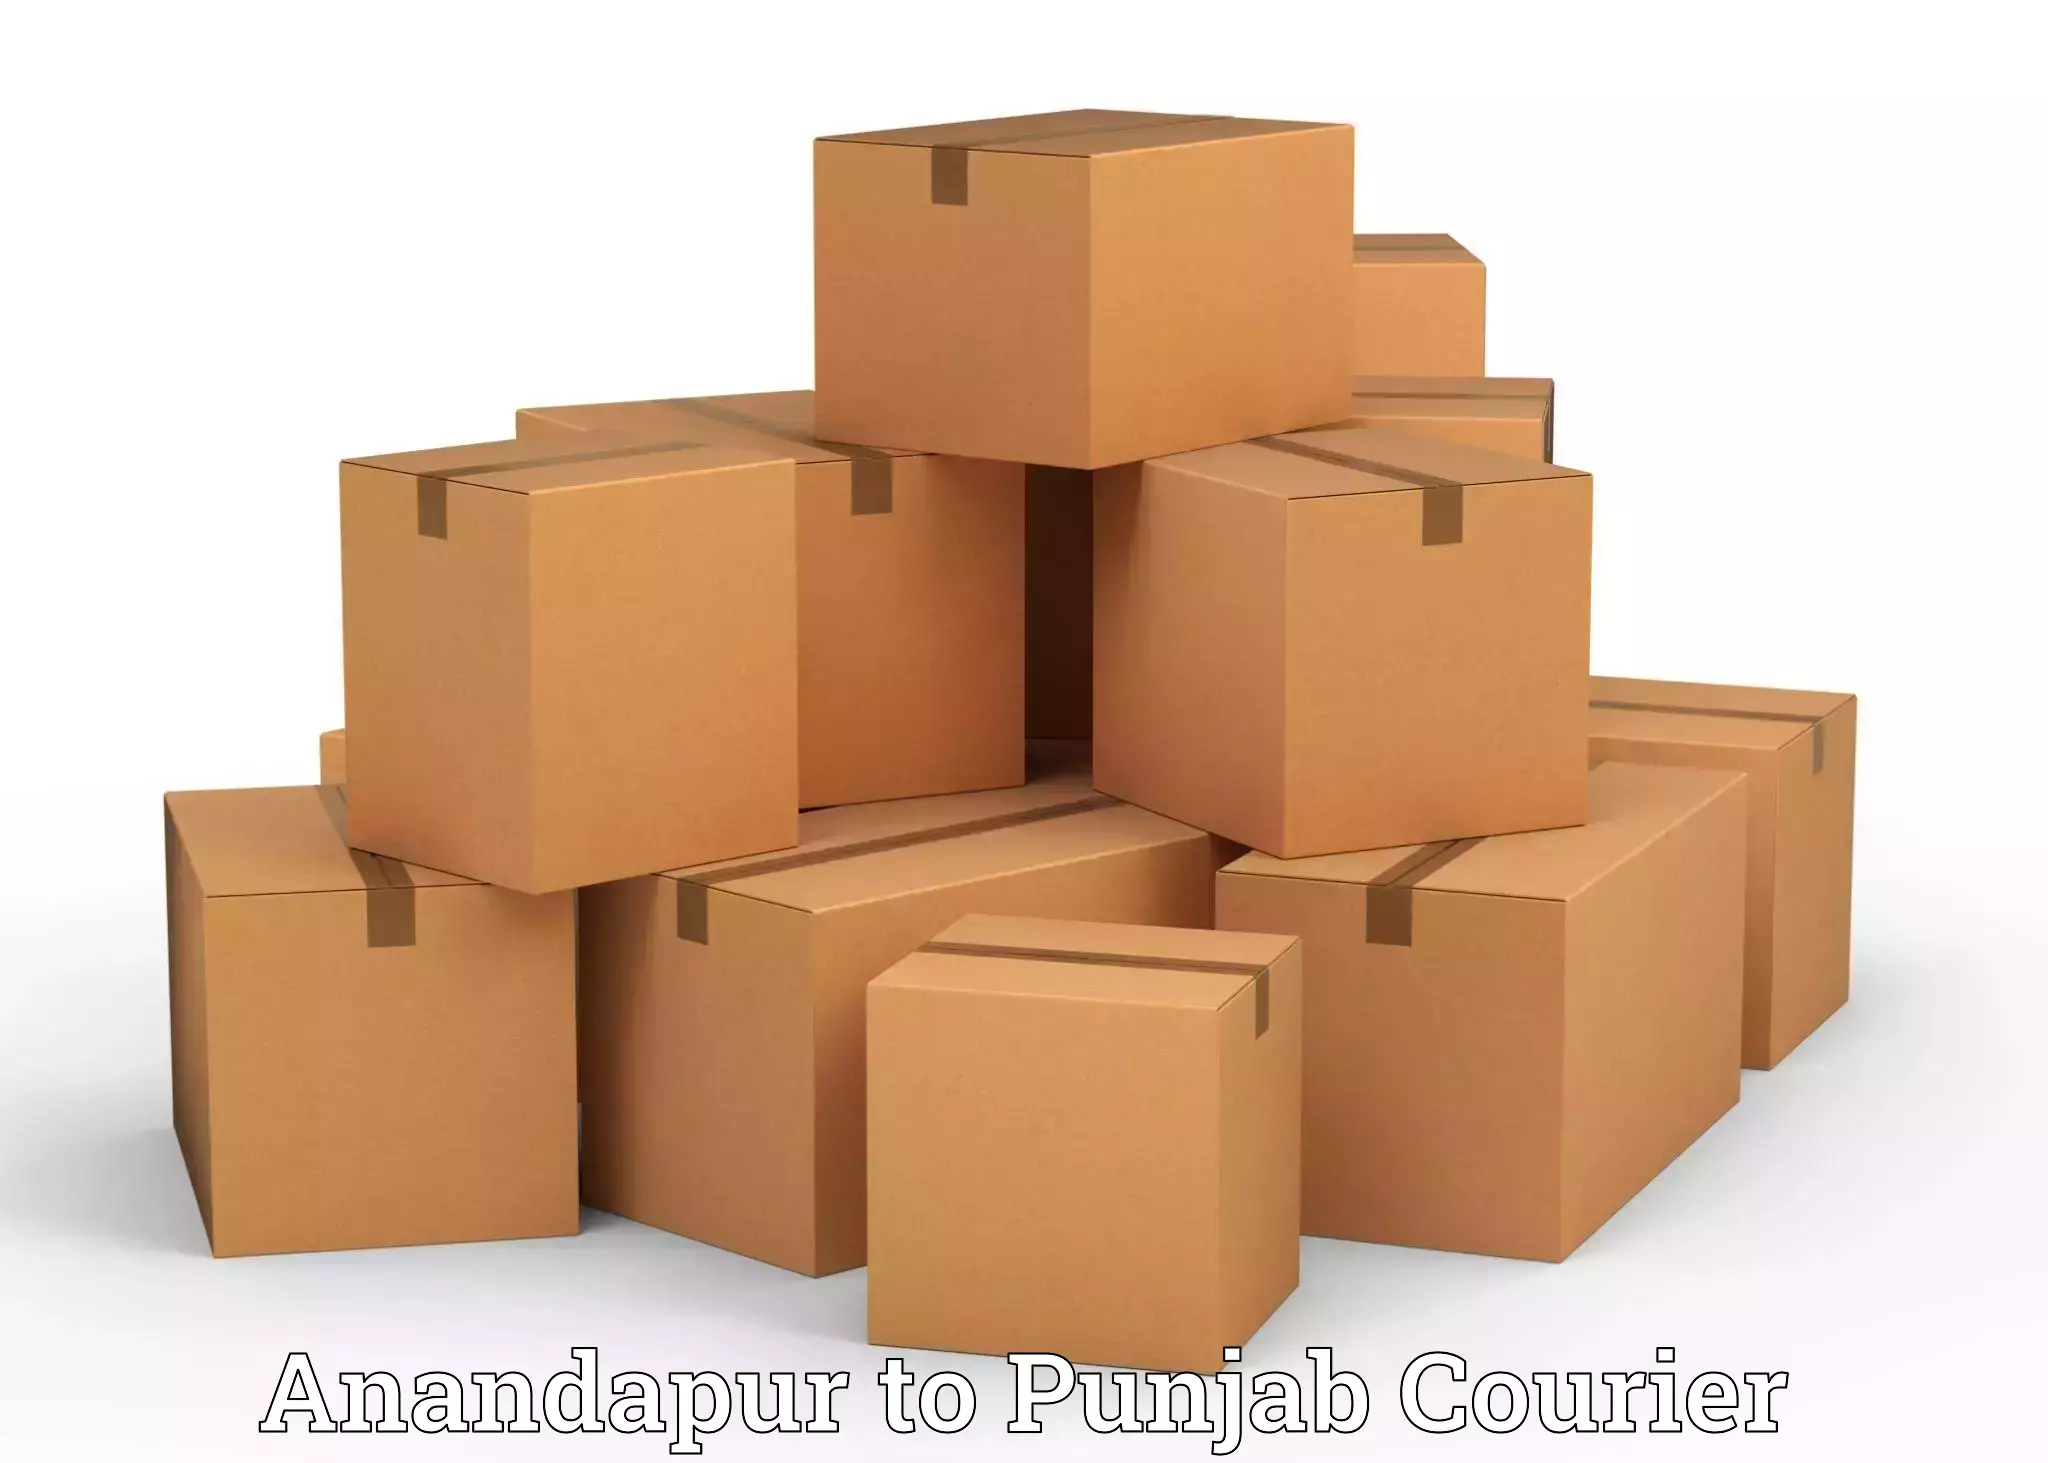 Trusted relocation experts Anandapur to Mohali